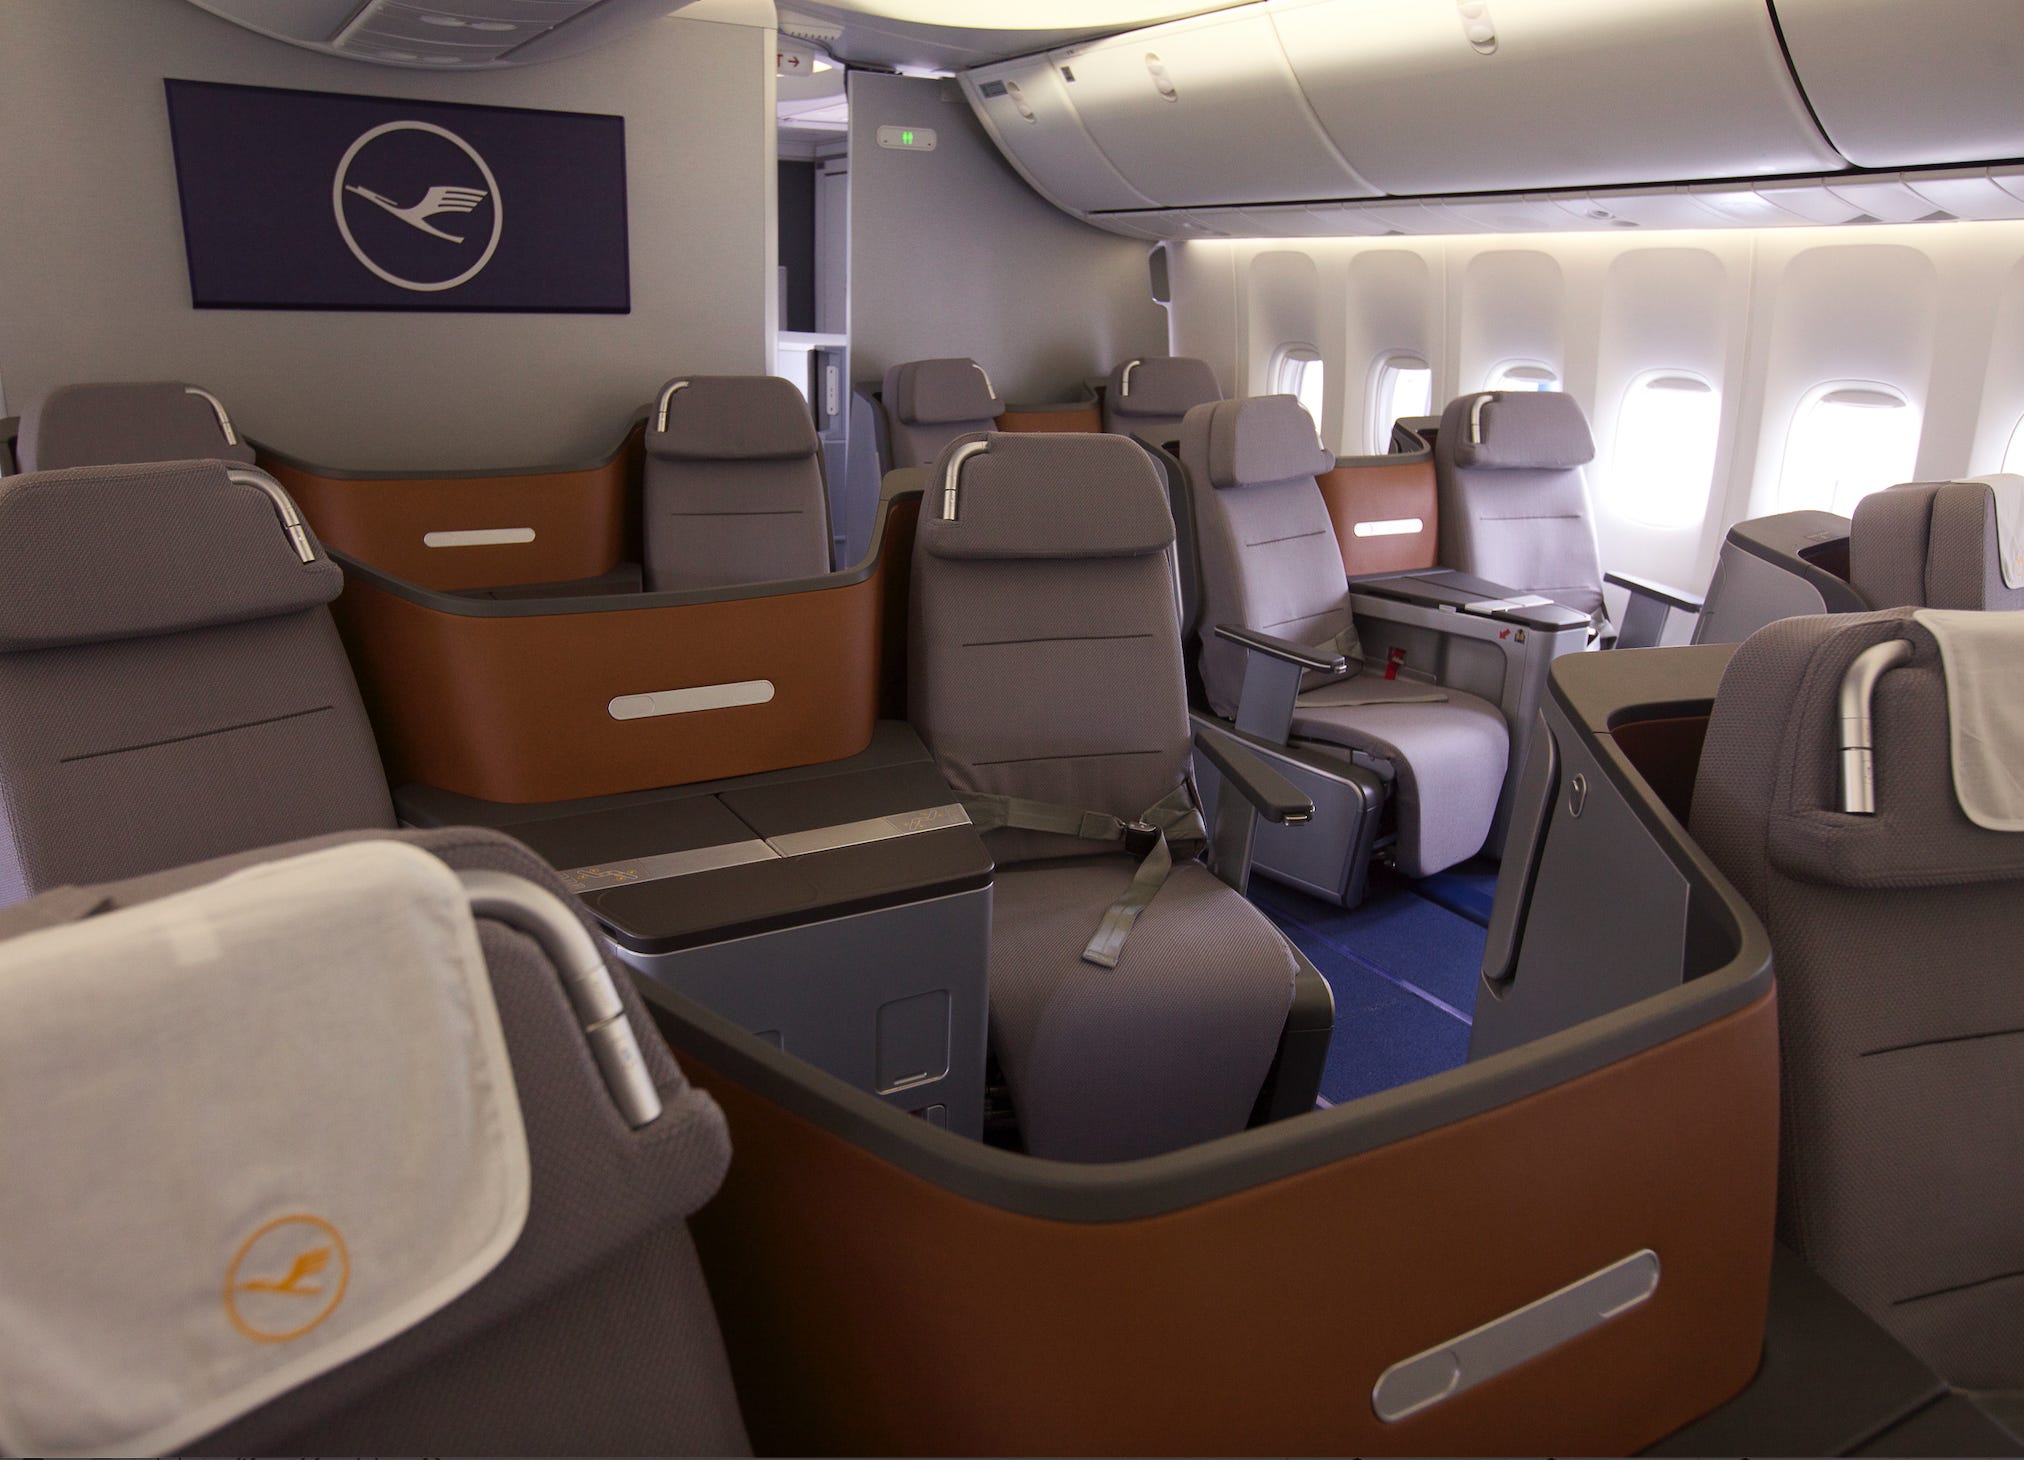 <p><a href="https://www.lufthansa.com/ge/en/seat-maps-long-haul">Lufthansa</a> has a notoriously mediocre business class, with many of its widebody planes — like the Boeing 747, the Airbus A330, and the Airbus A380 — sporting cabins in 2×2×2 layouts lacking direct-aisle access and privacy.</p><p>Following the trend of improving privacy in business class, Allegris will be on <a href="https://www.businessinsider.com/qatar-new-qsuite-adding-first-class-to-boeing-777x-2024-3">par with the likes of Qatar Airways, All Nippon Airways, and Delta Air Lines</a>, which offer sliding doors in their premium cabins. <a href="https://www.businessinsider.com/air-india-business-class-a350-compared-to-777-legacy-2024-2?mrfhud=true">Air India</a> and British Airways have made similar upgrades.</p>